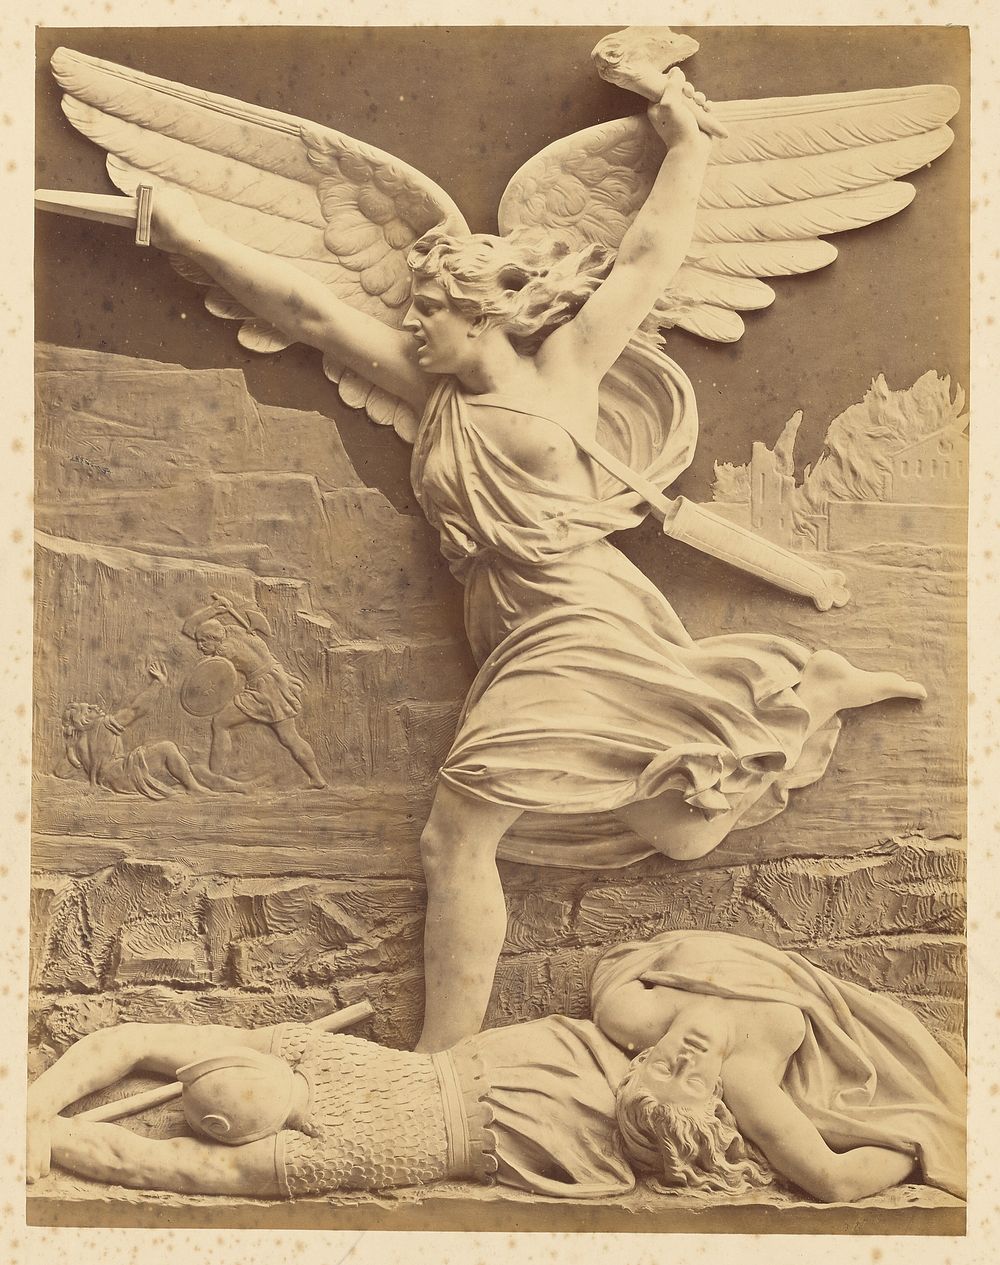 Relief sculpture of winged figure with daggar